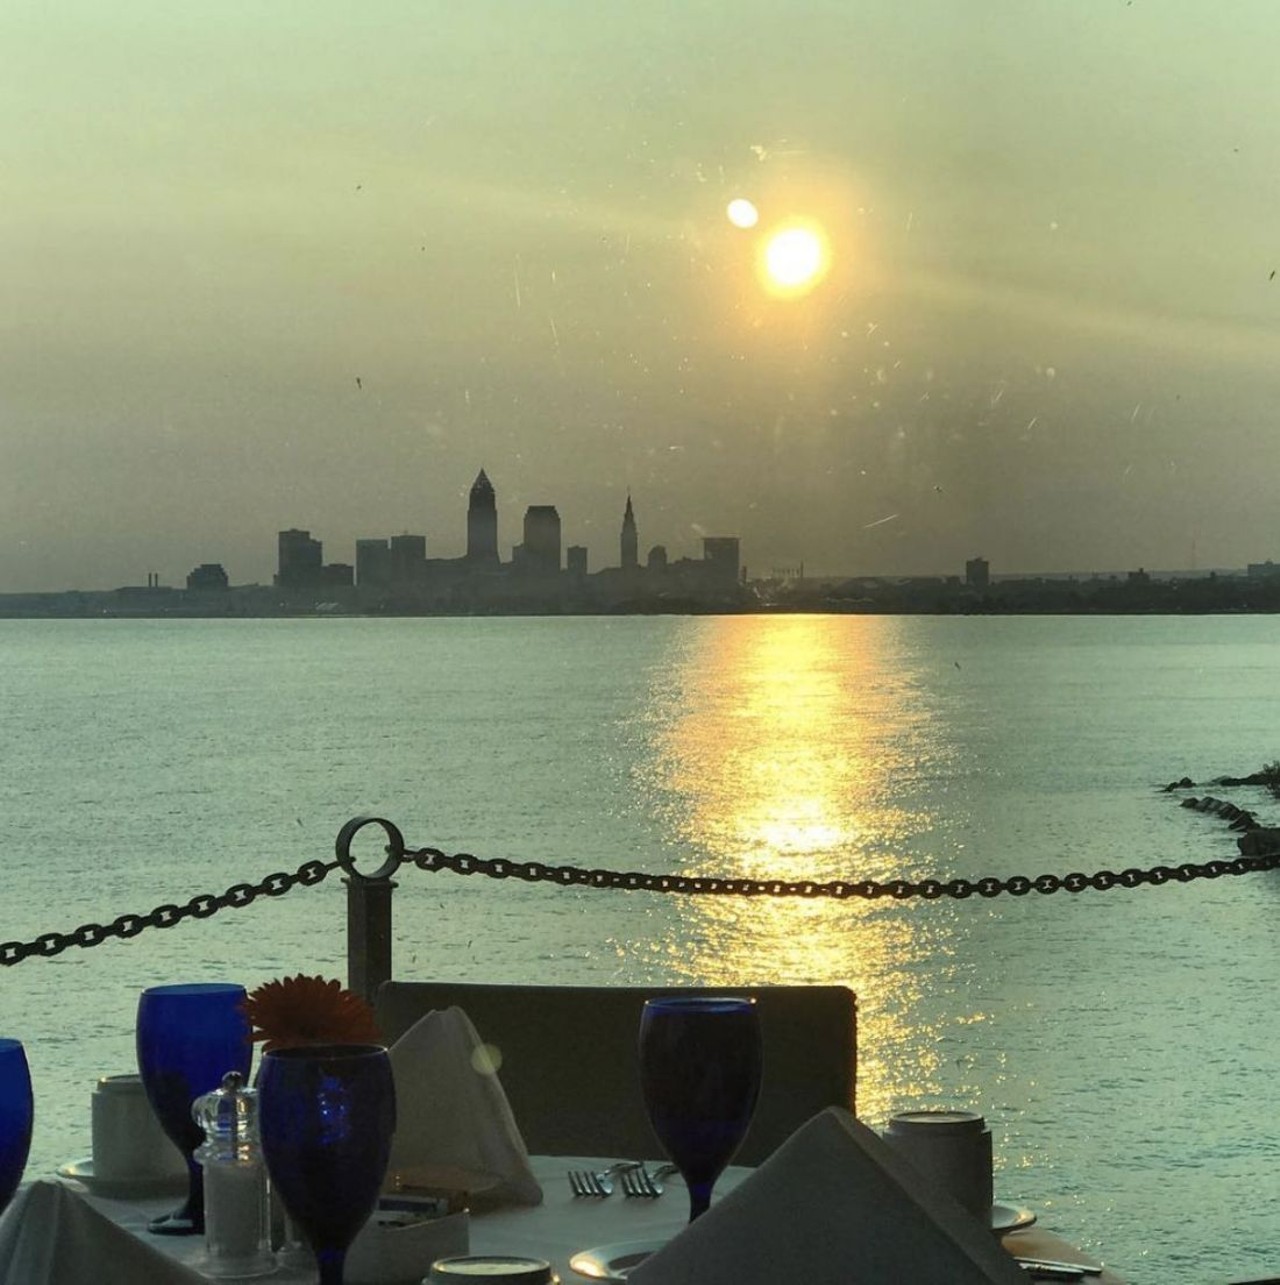  Pier W
12700 Lake Ave., Lakewood
This Lakewood seafood restaurant has won Most Romantic Restaurant in Scene&#146;s Best Of poll multiple times, and for good reason. The views of Lake Erie and the city are unmatched, the atmosphere is sophisticated and elegant and the seafood is delicious. 
Photo via @PierWCleveland/Instagram